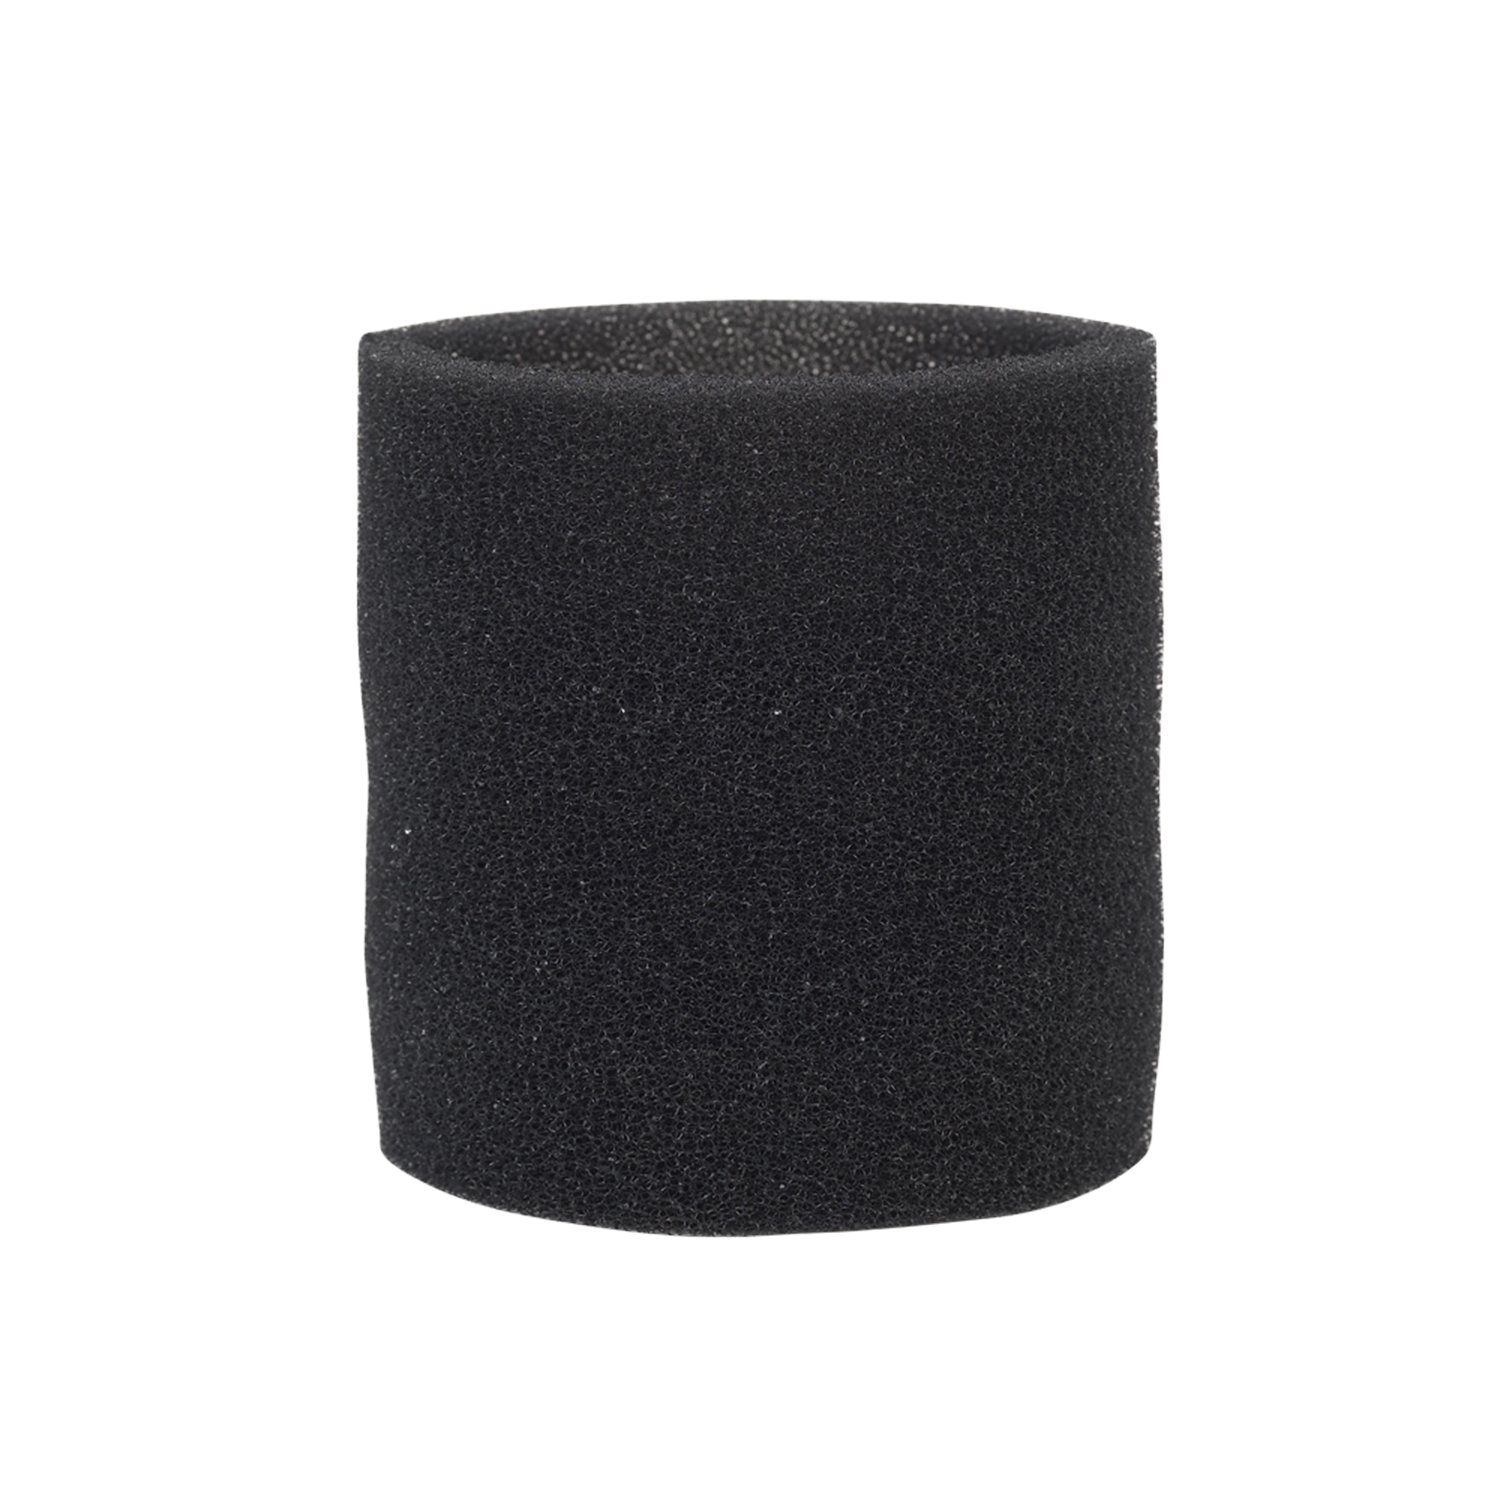 Foam Sleeve Filter for Shop-Vac 90350 90304 90333 Replacement Parts for Mo A6E7